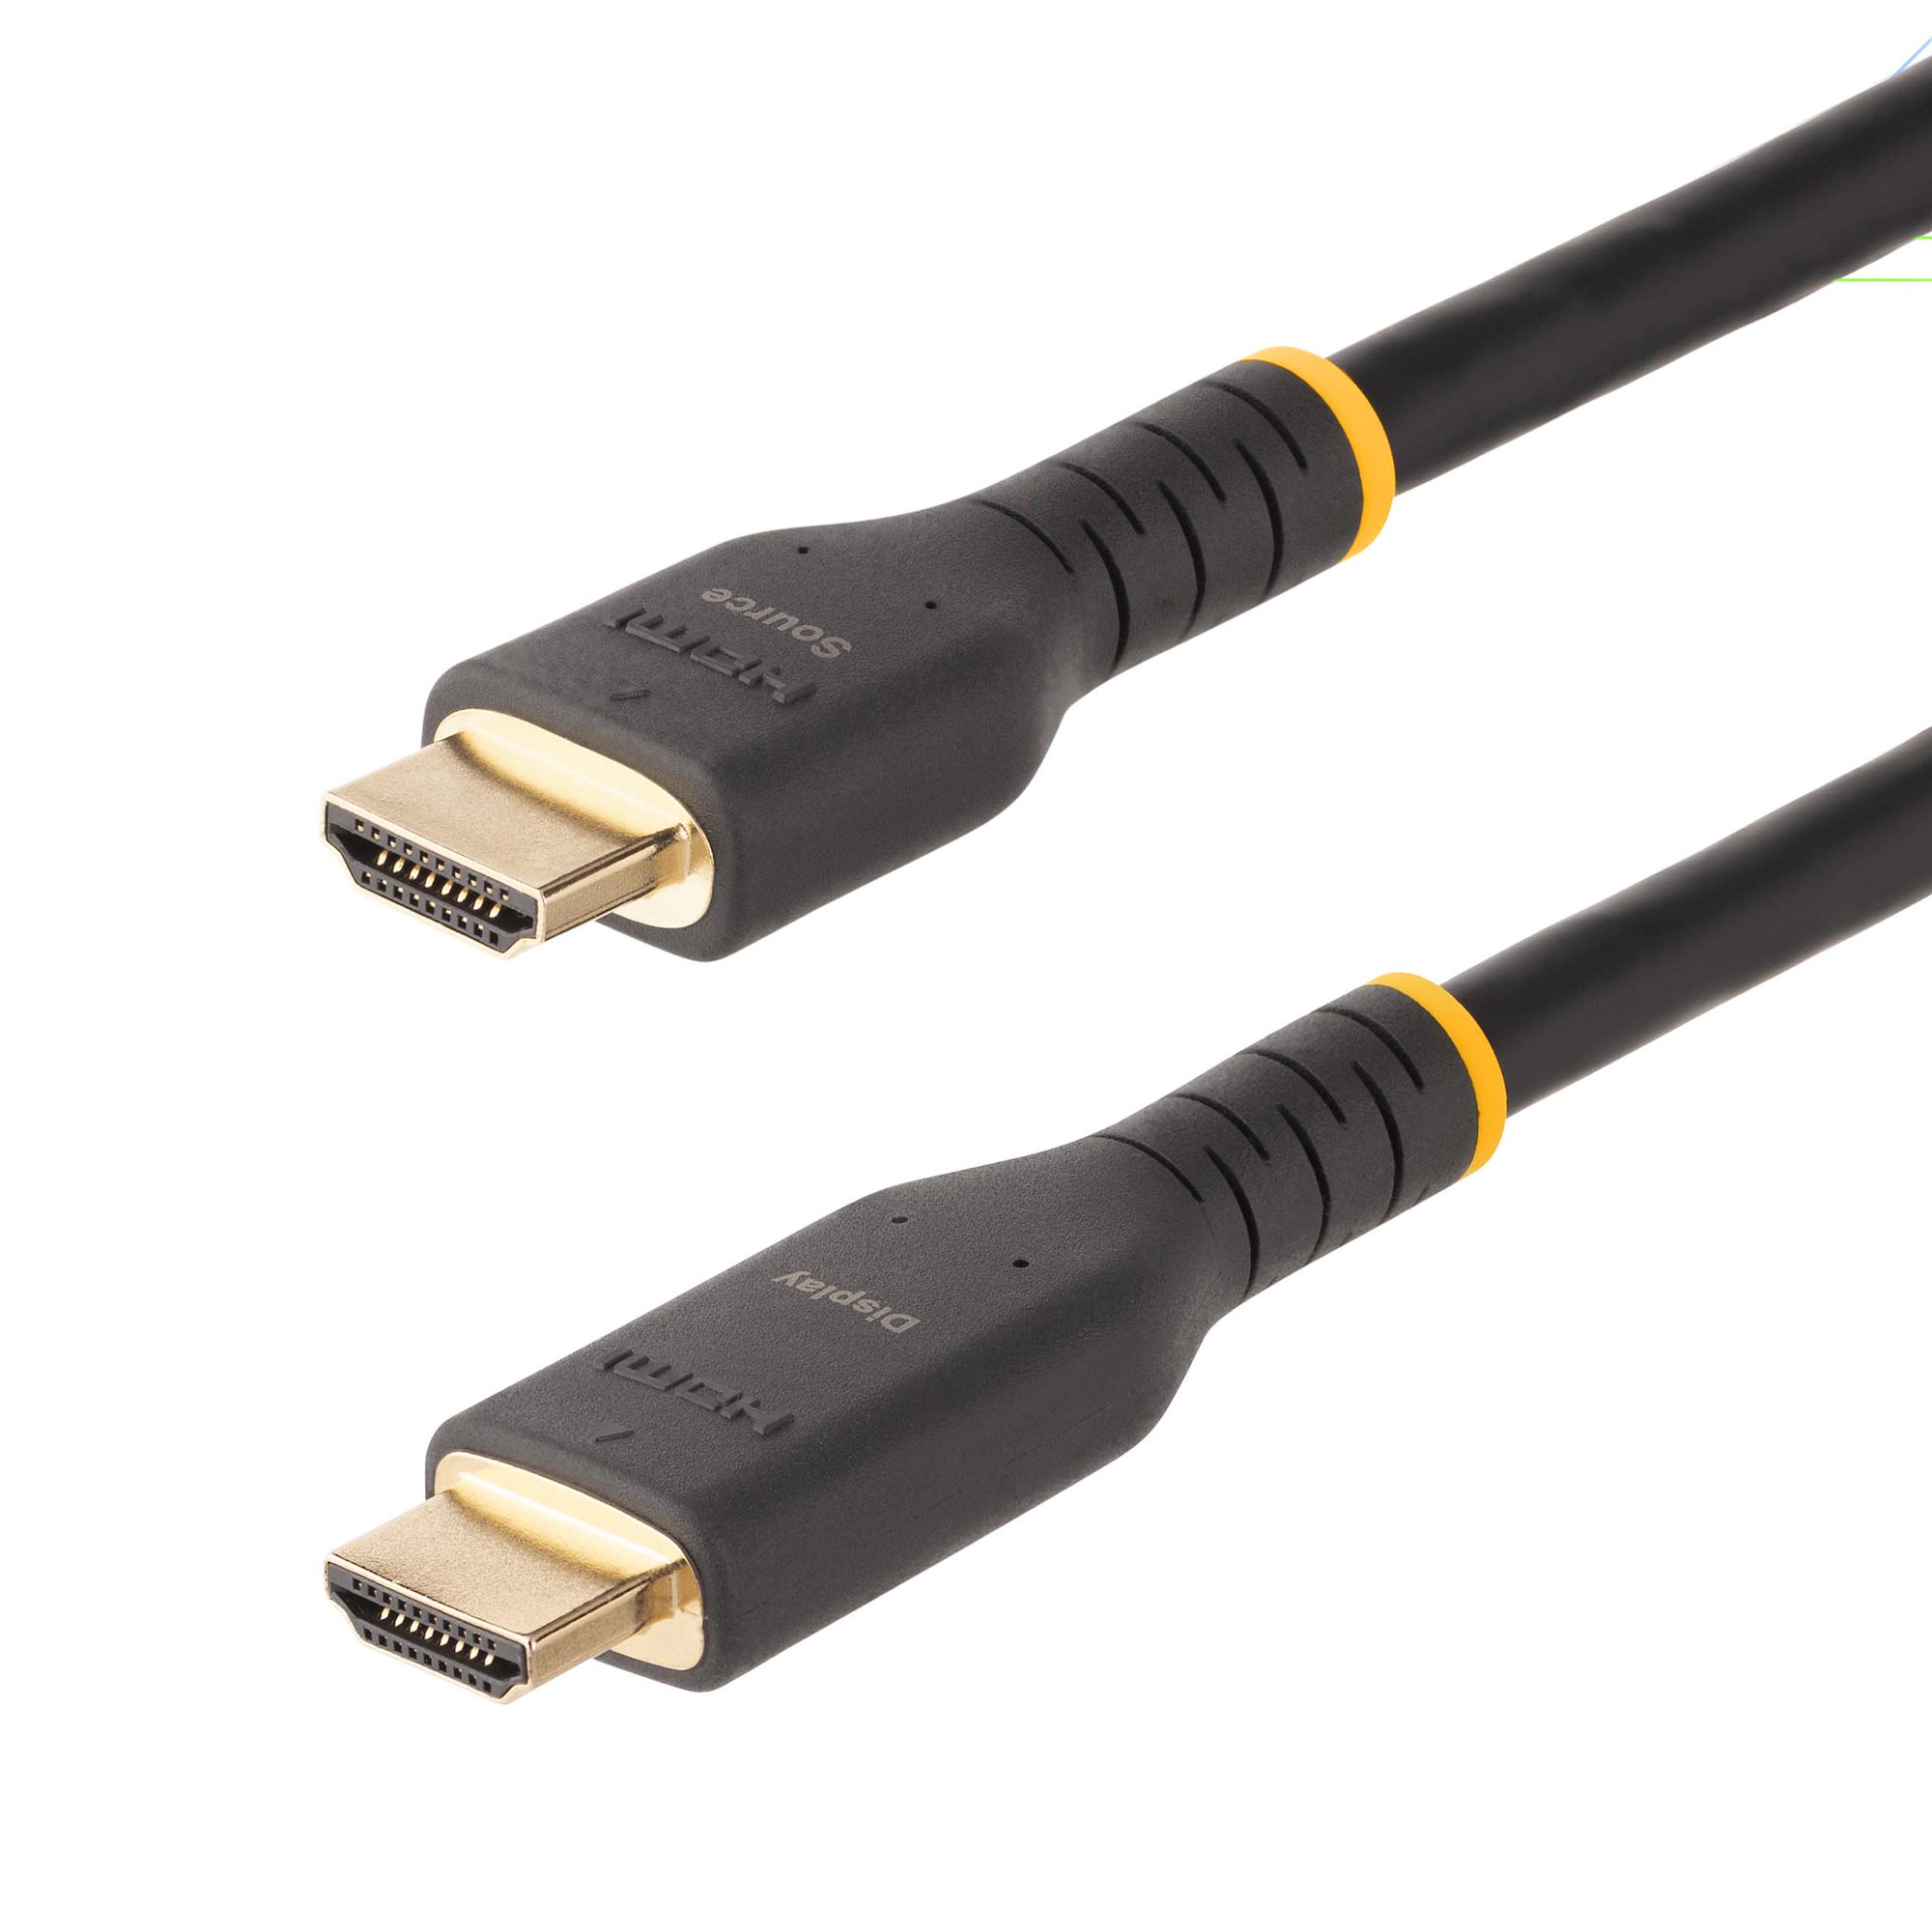 【RH2A-7M-HDMI-CABLE】23FT ACTIVE HDMI CABLE, HDMI 2.0